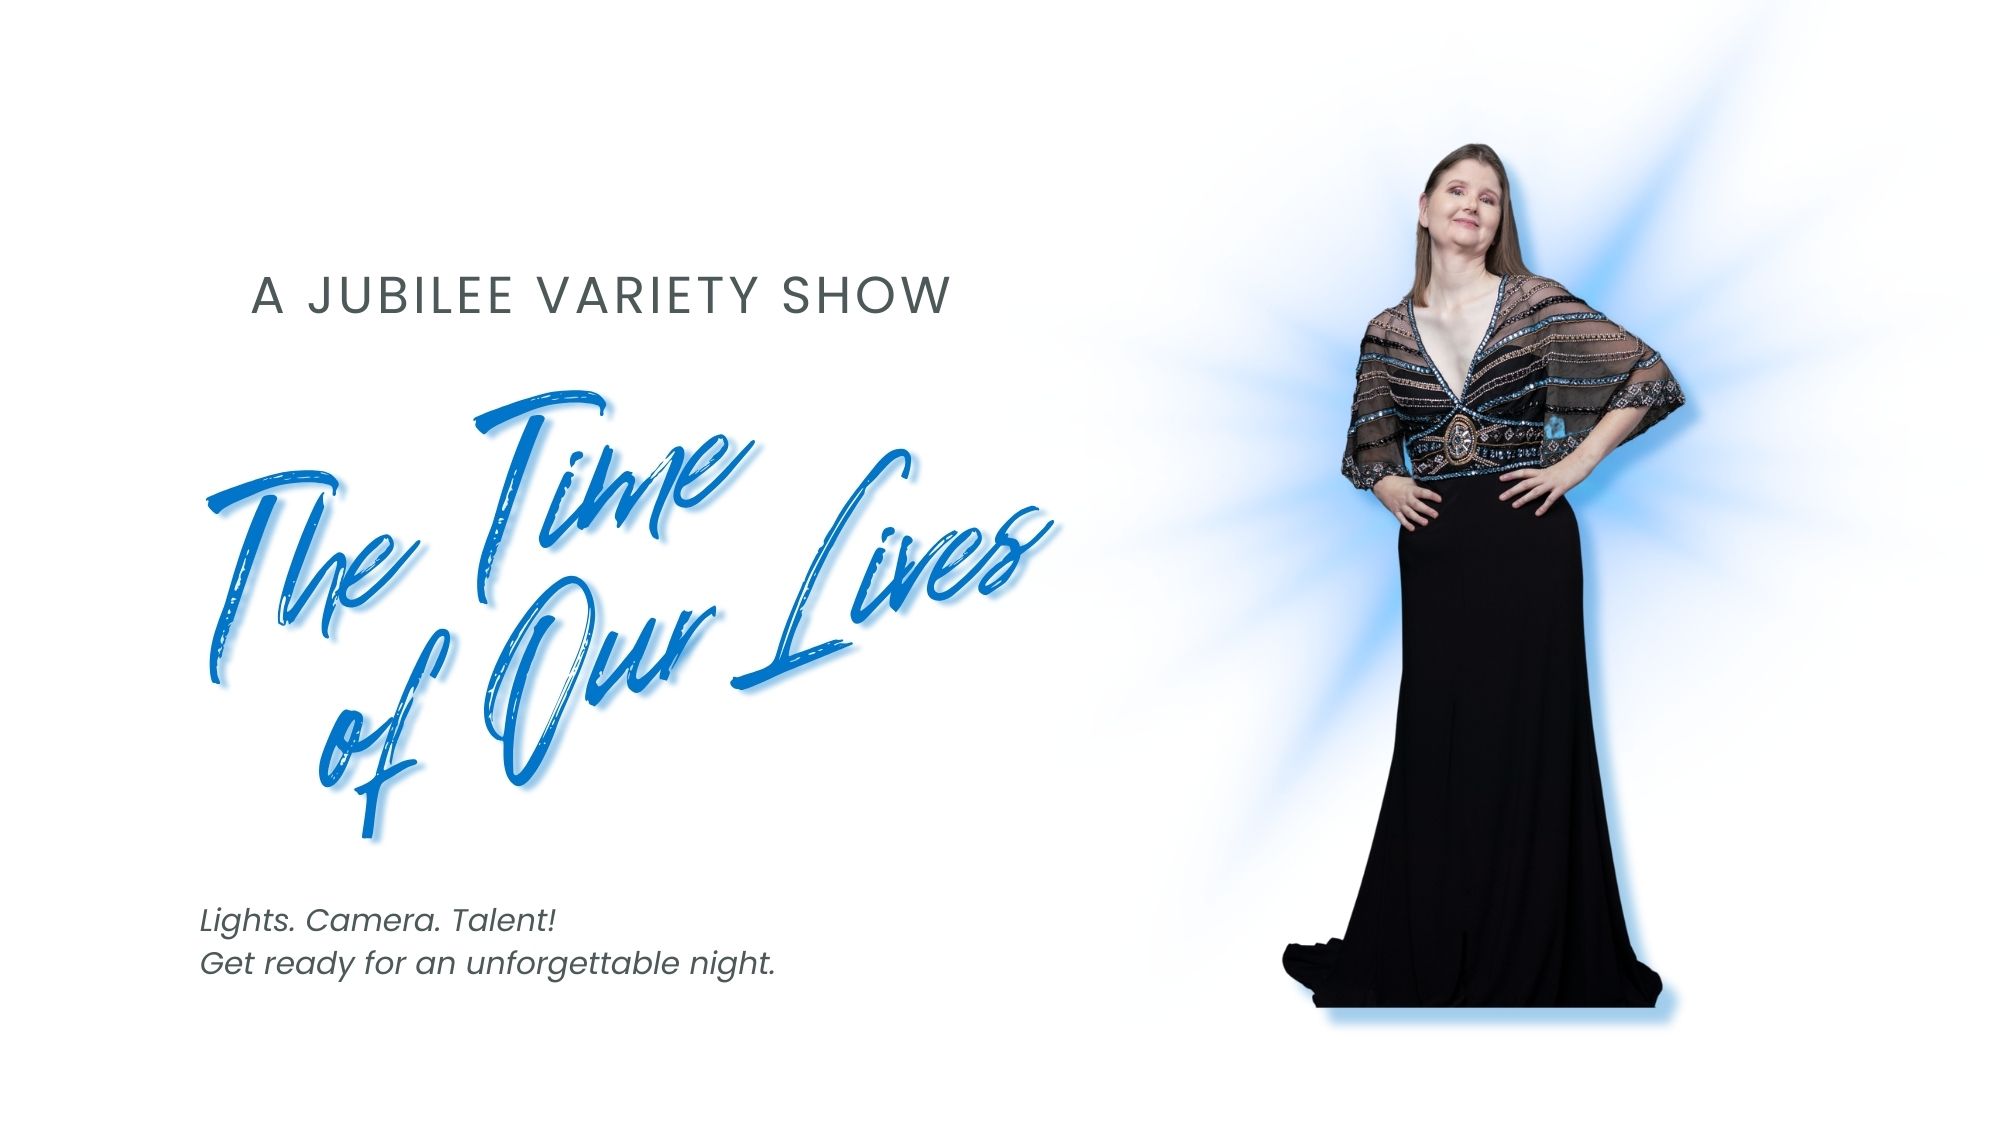 variety show flyer featuring woman in beautiful gown and tagline The Time of Our Lives